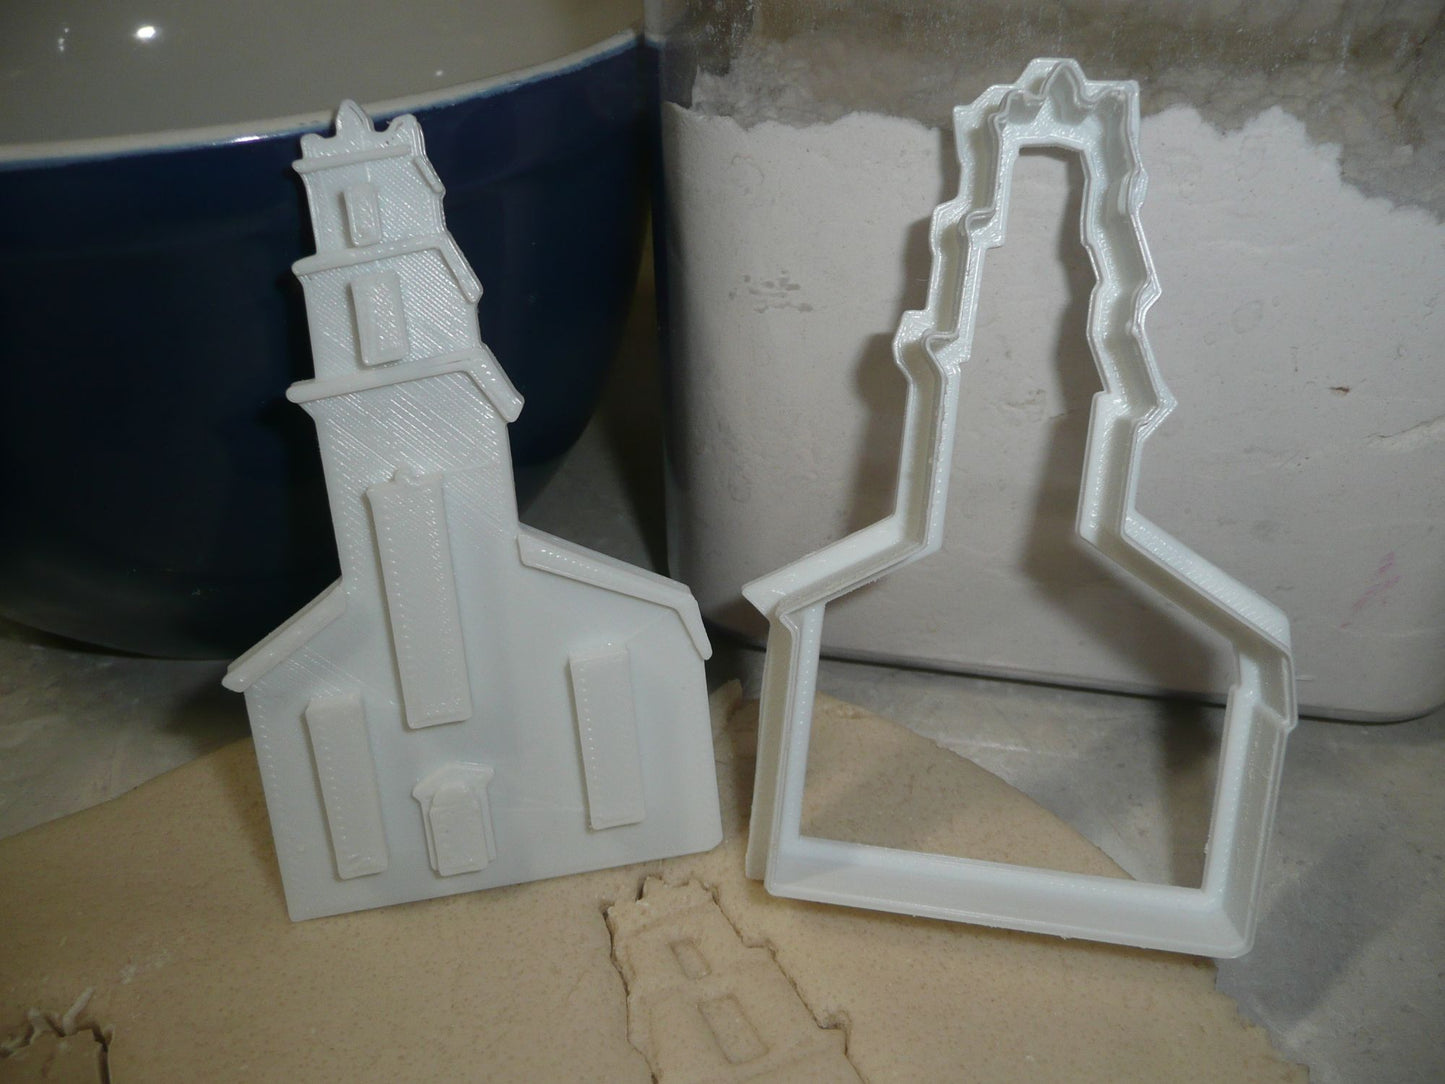 Church Outline Cookie Cutter and Detailed Stamp Embosser Set of 2 USA PR2170